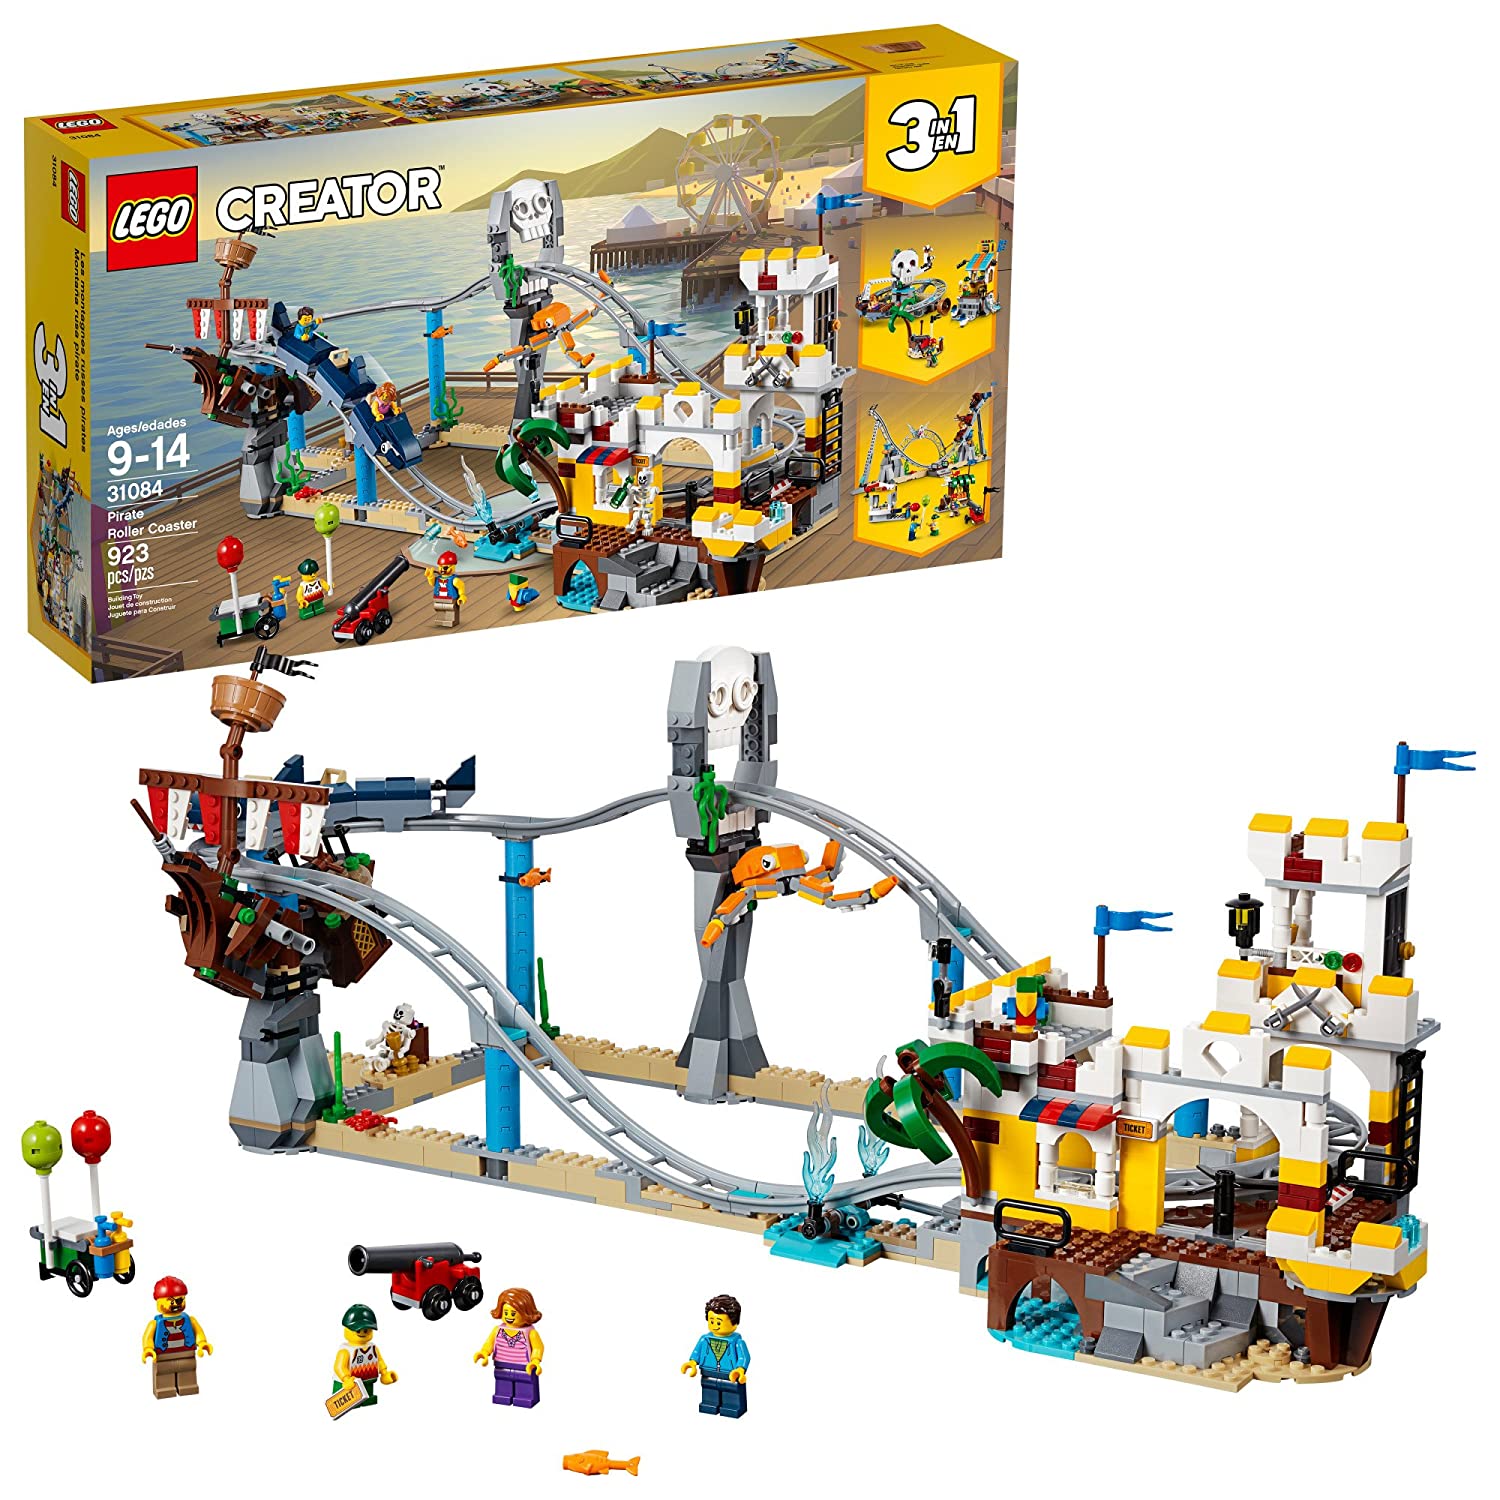 Top 5 Best Lego Roller Coaster Reviews in 2022 2